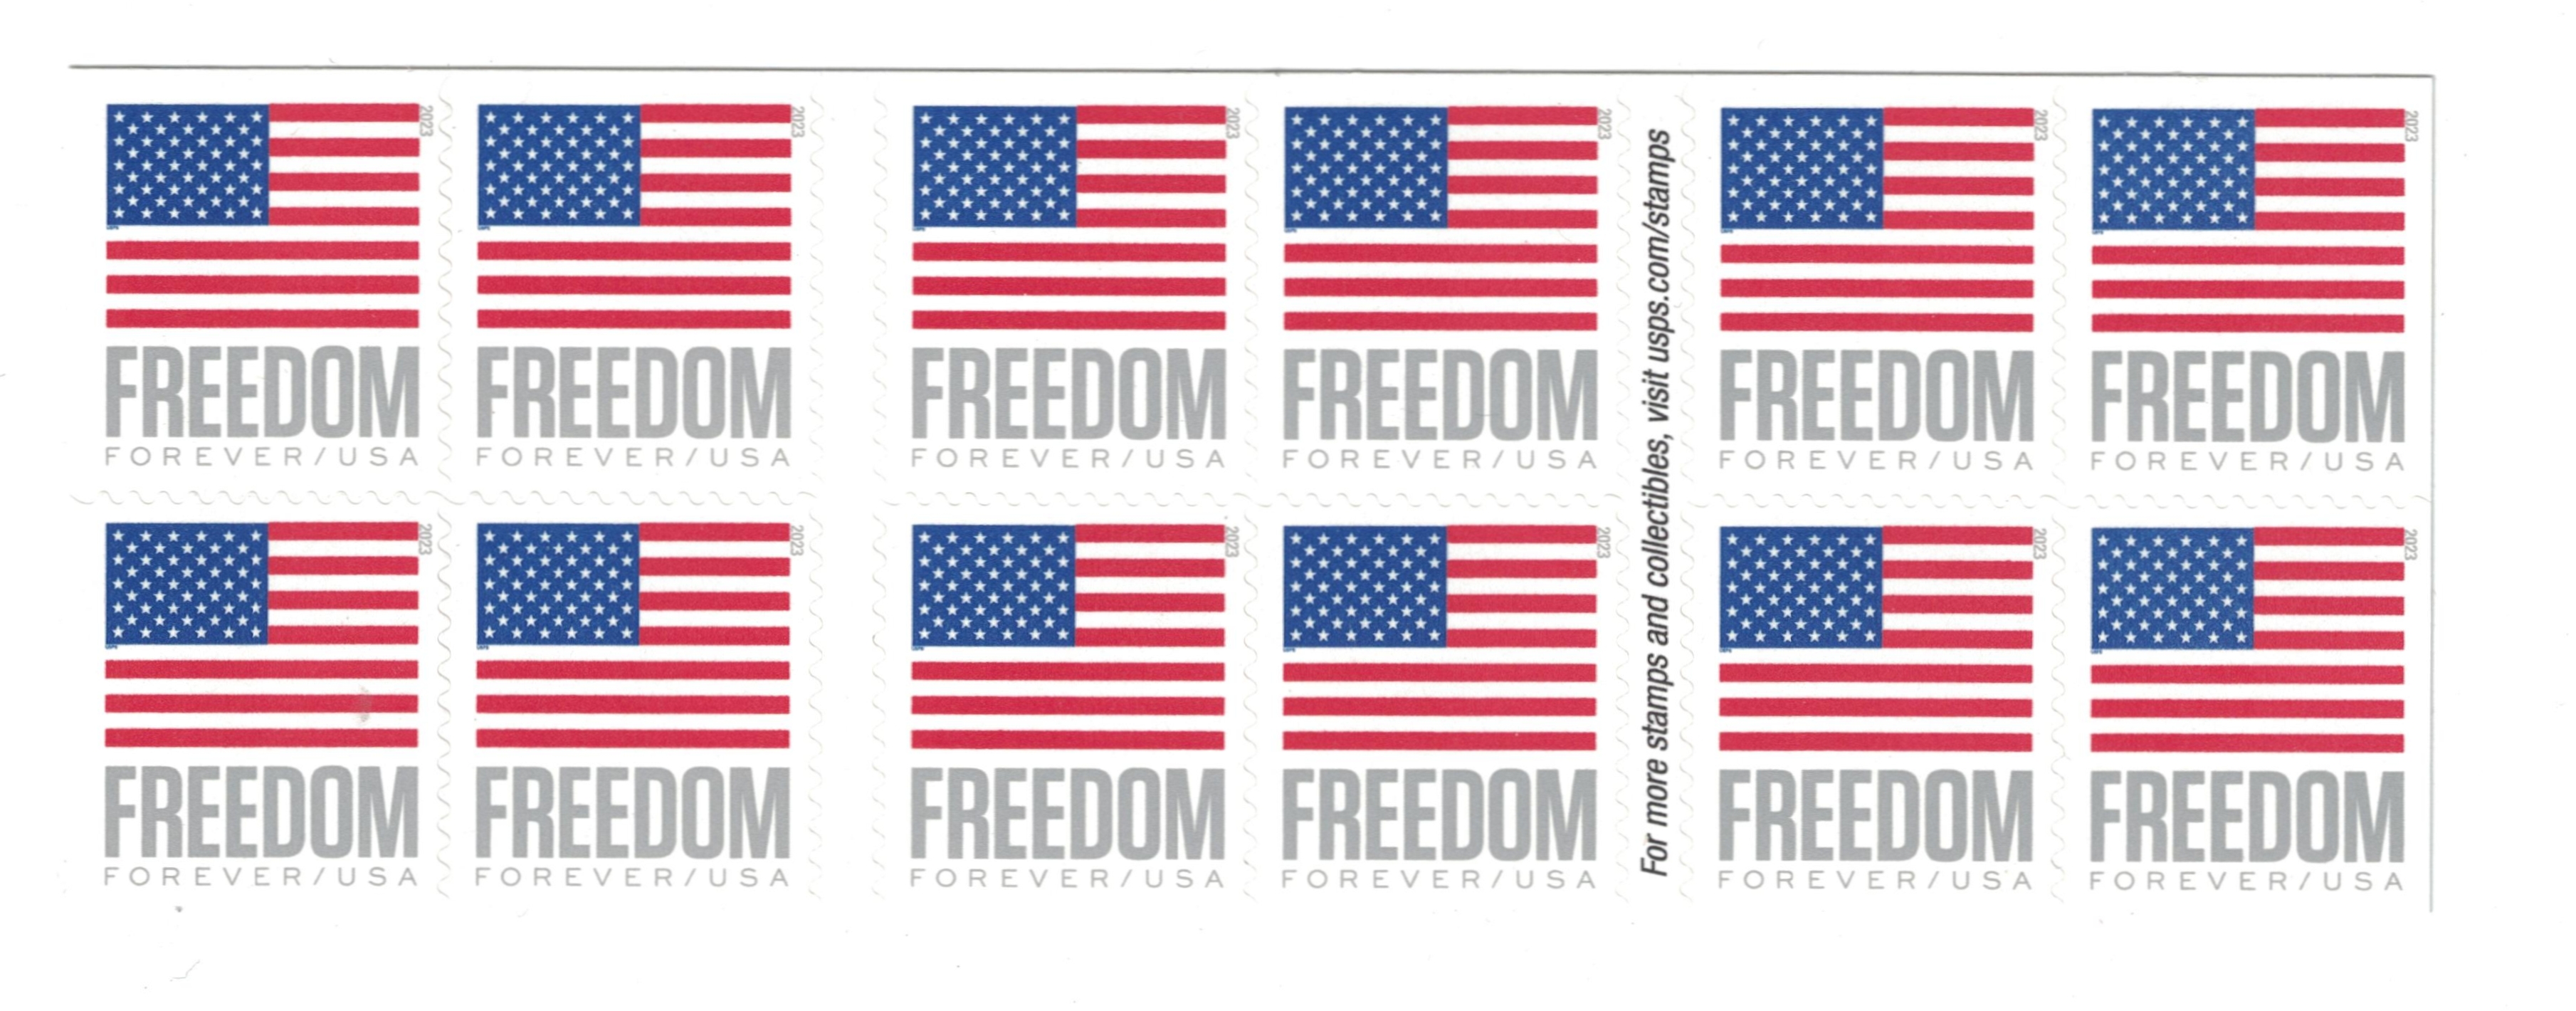 2023 US Flag Forever Stamps Book | Color: White | Size: Os | Gjqjmhgrsd's Closet